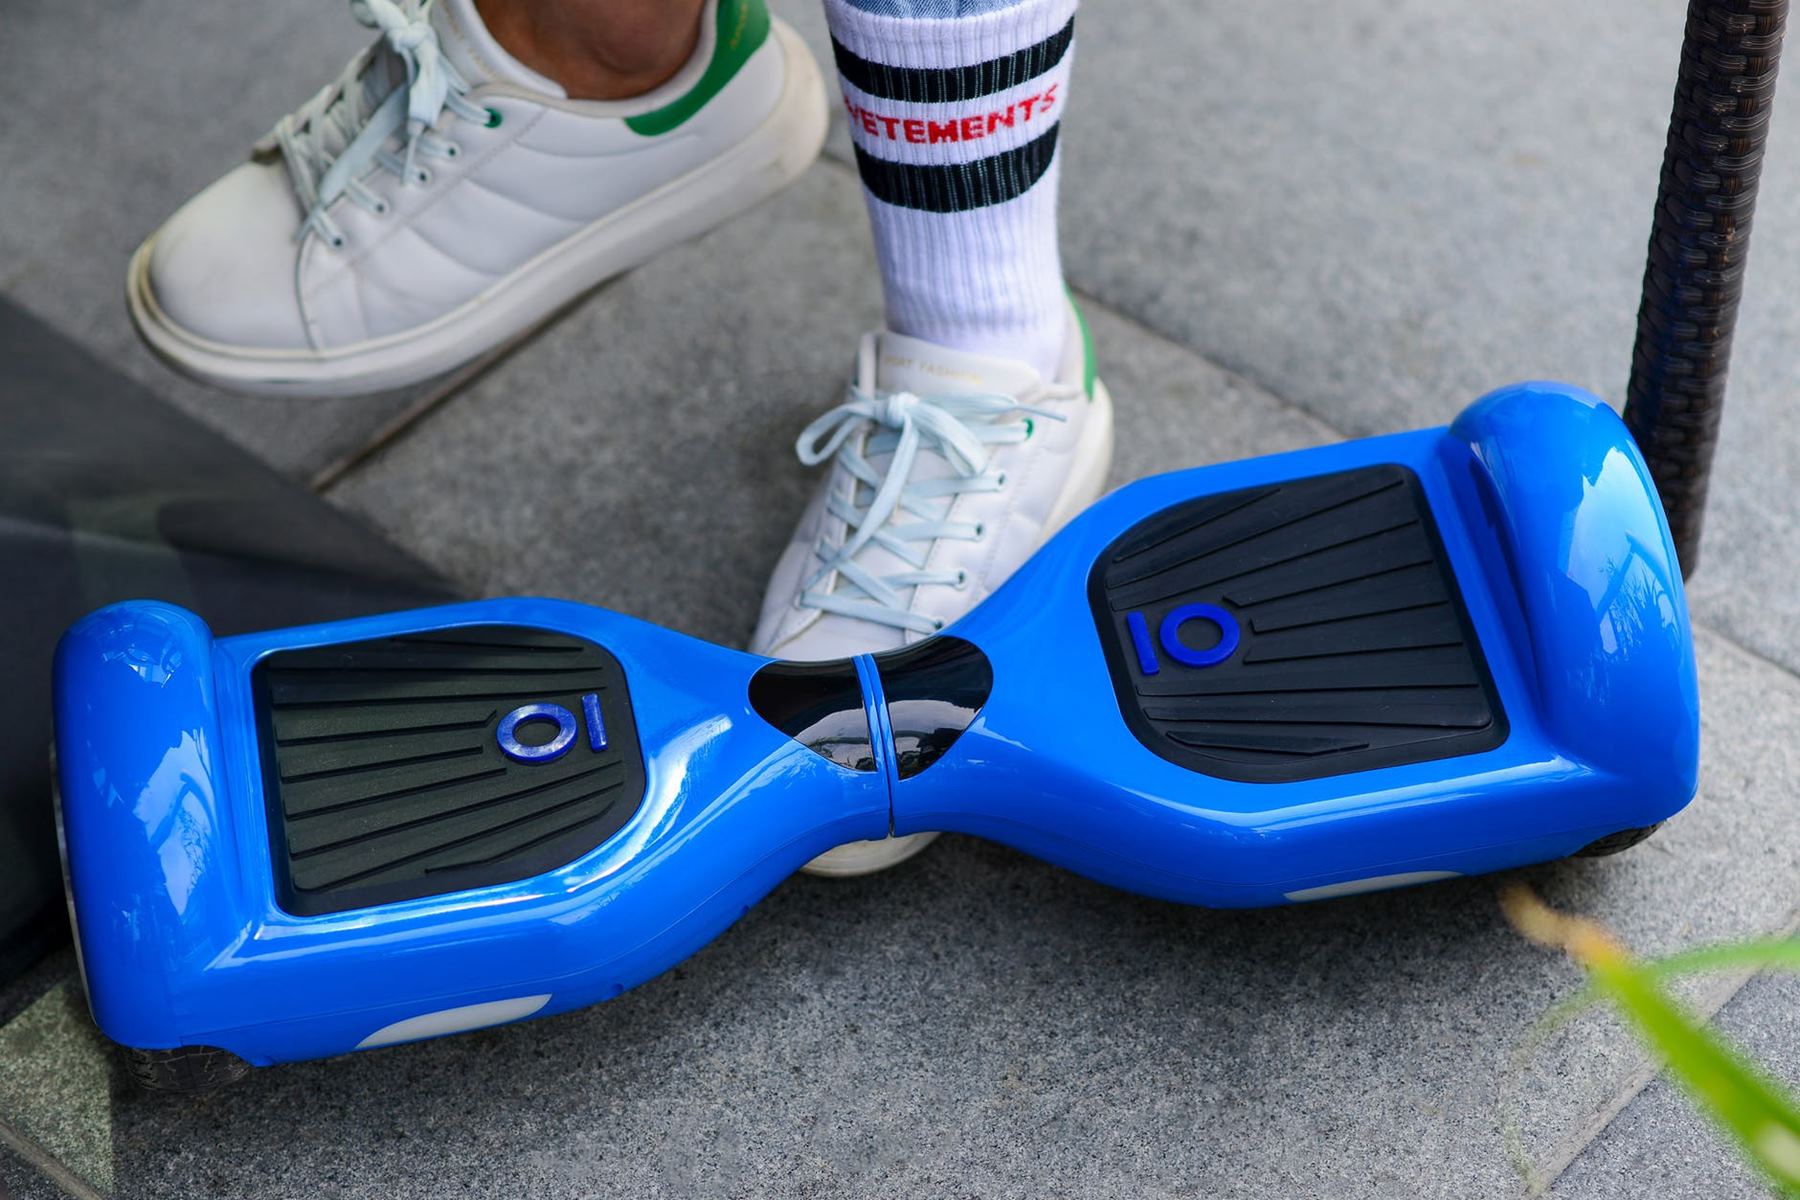 Comment choisir son hoverboard ? 